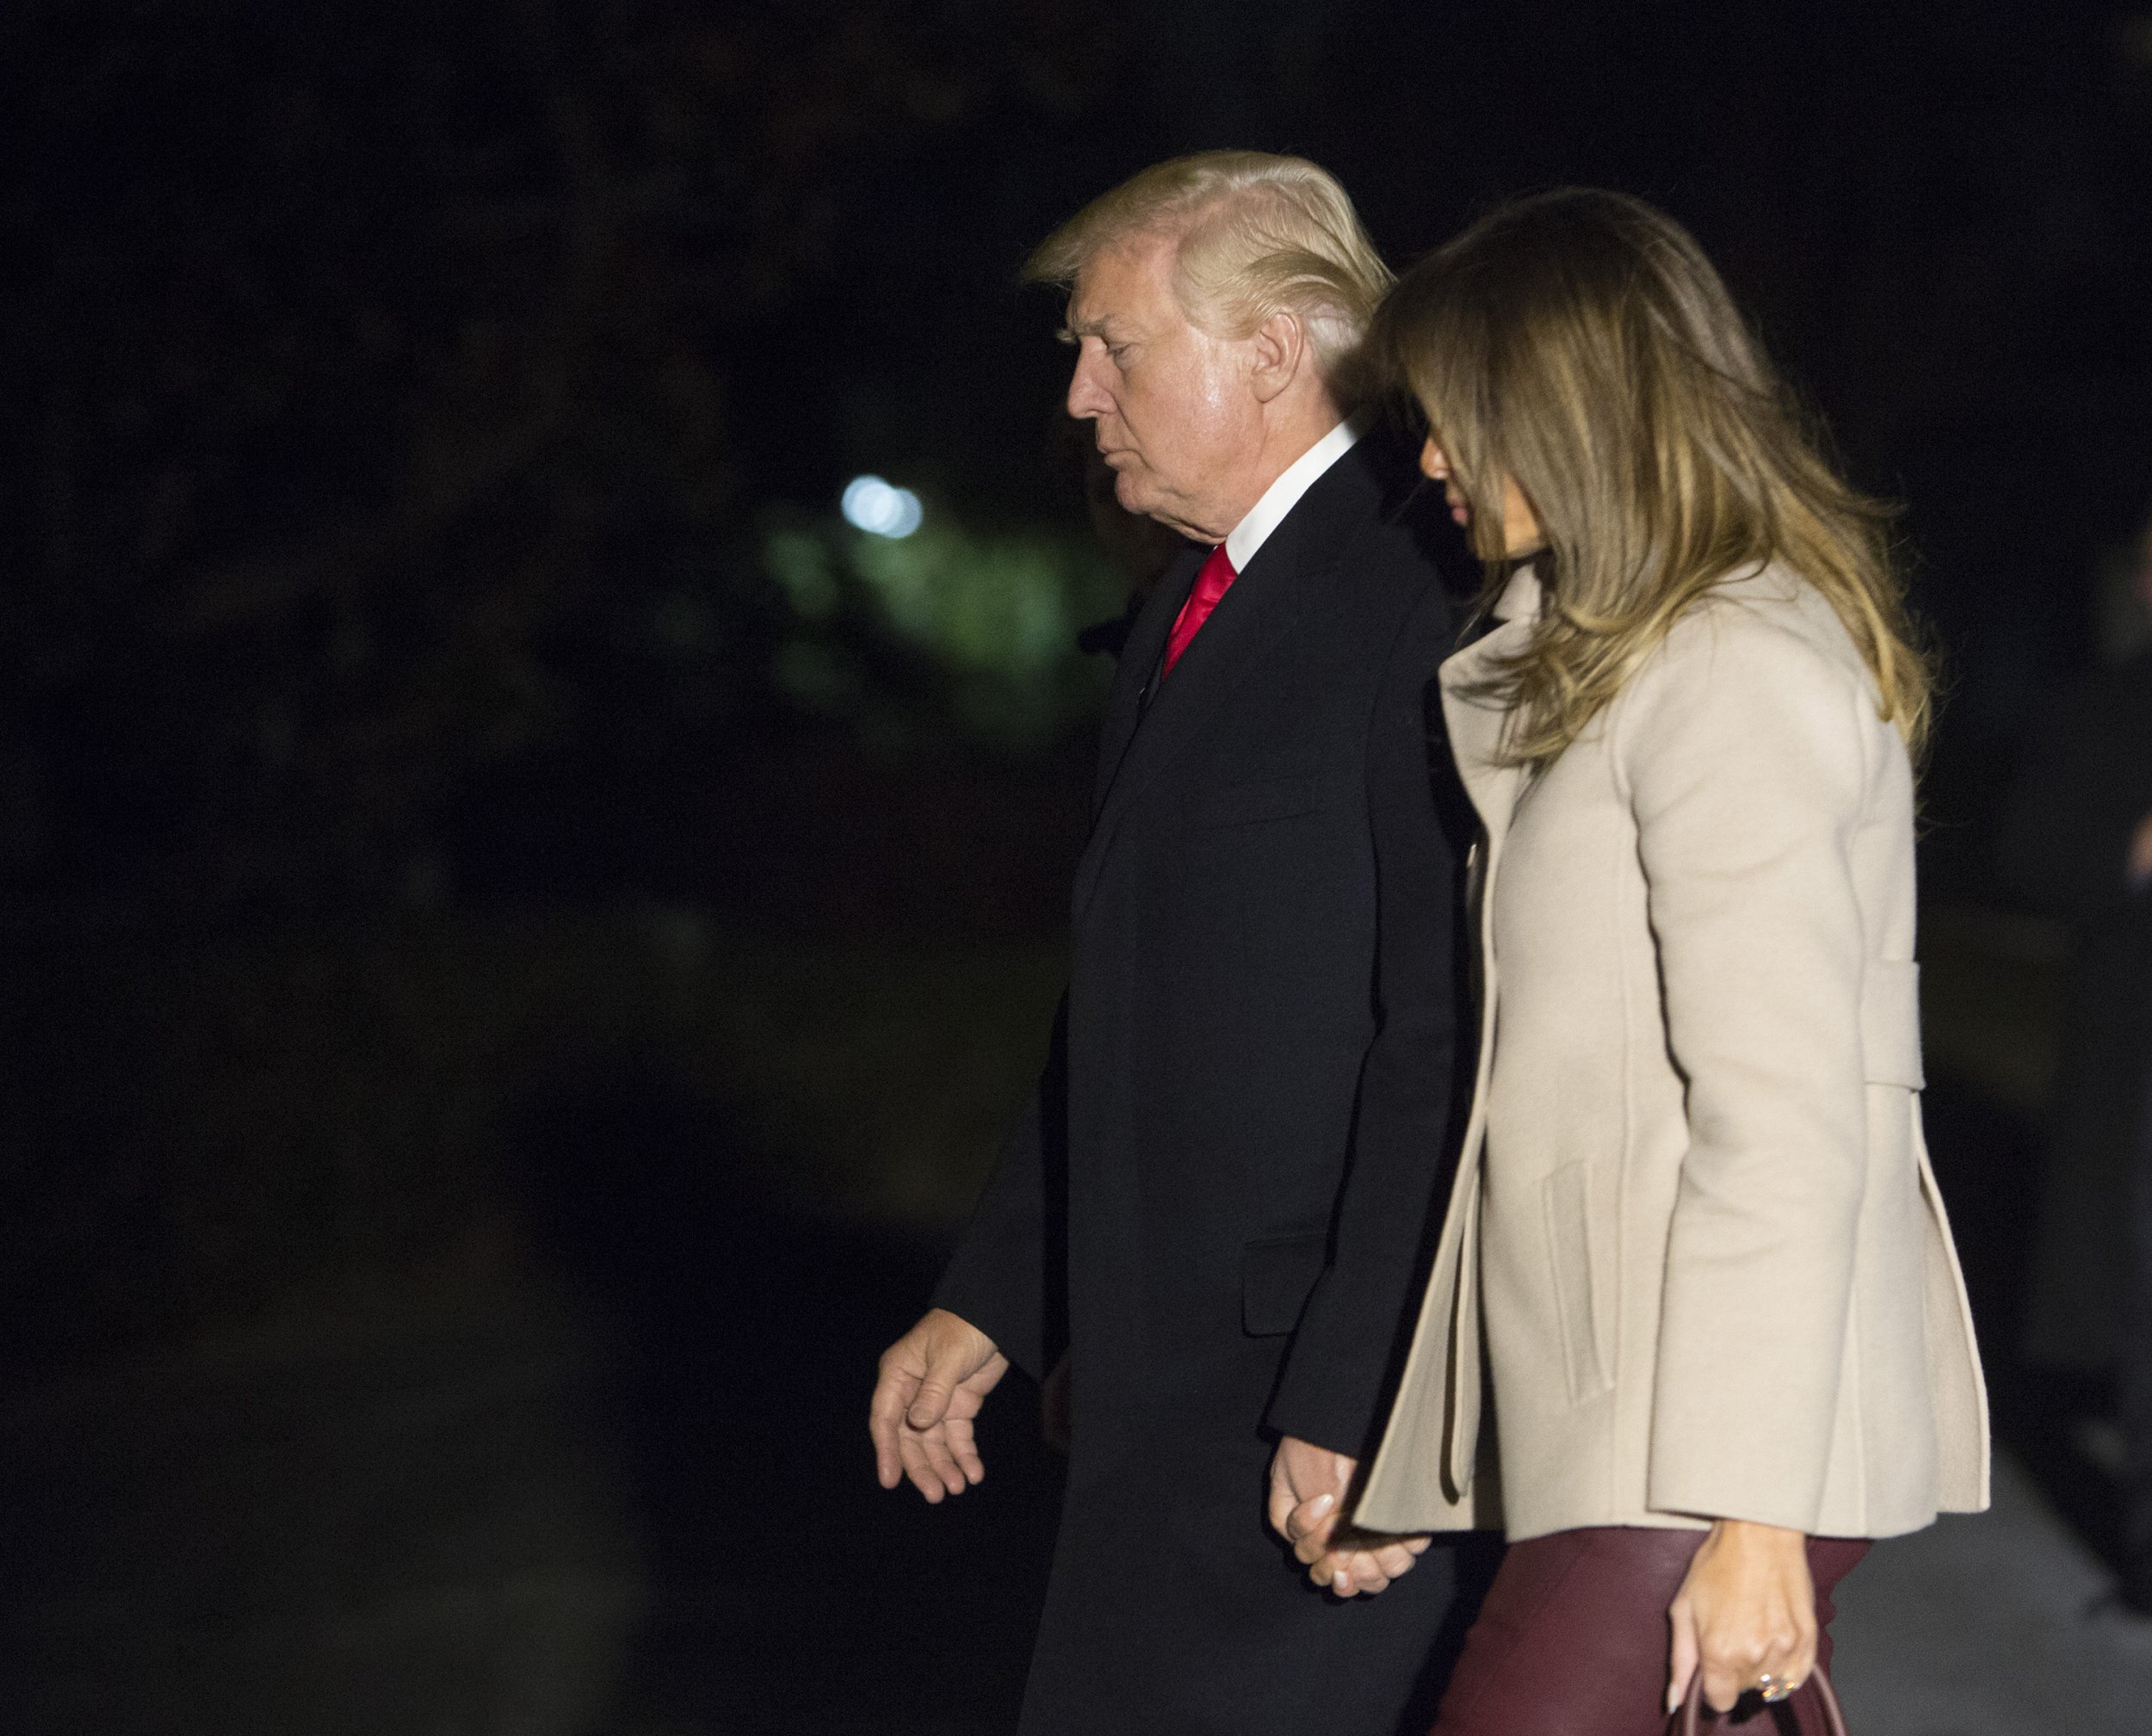 How Many Times Has Trump Cheated on His Wives? Heres What We Know